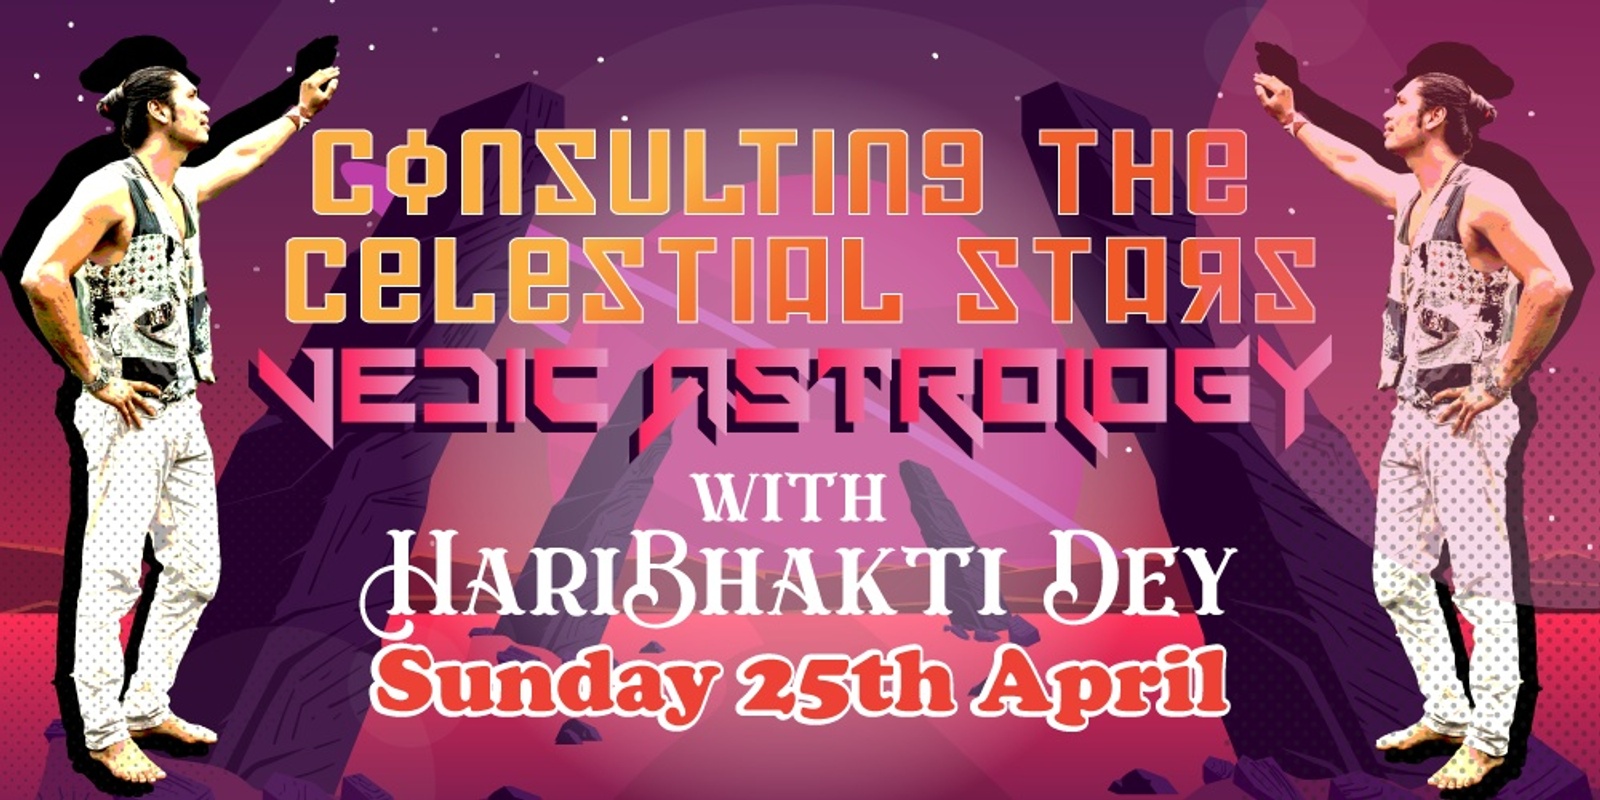 Banner image for Consulting The Celestial Stars